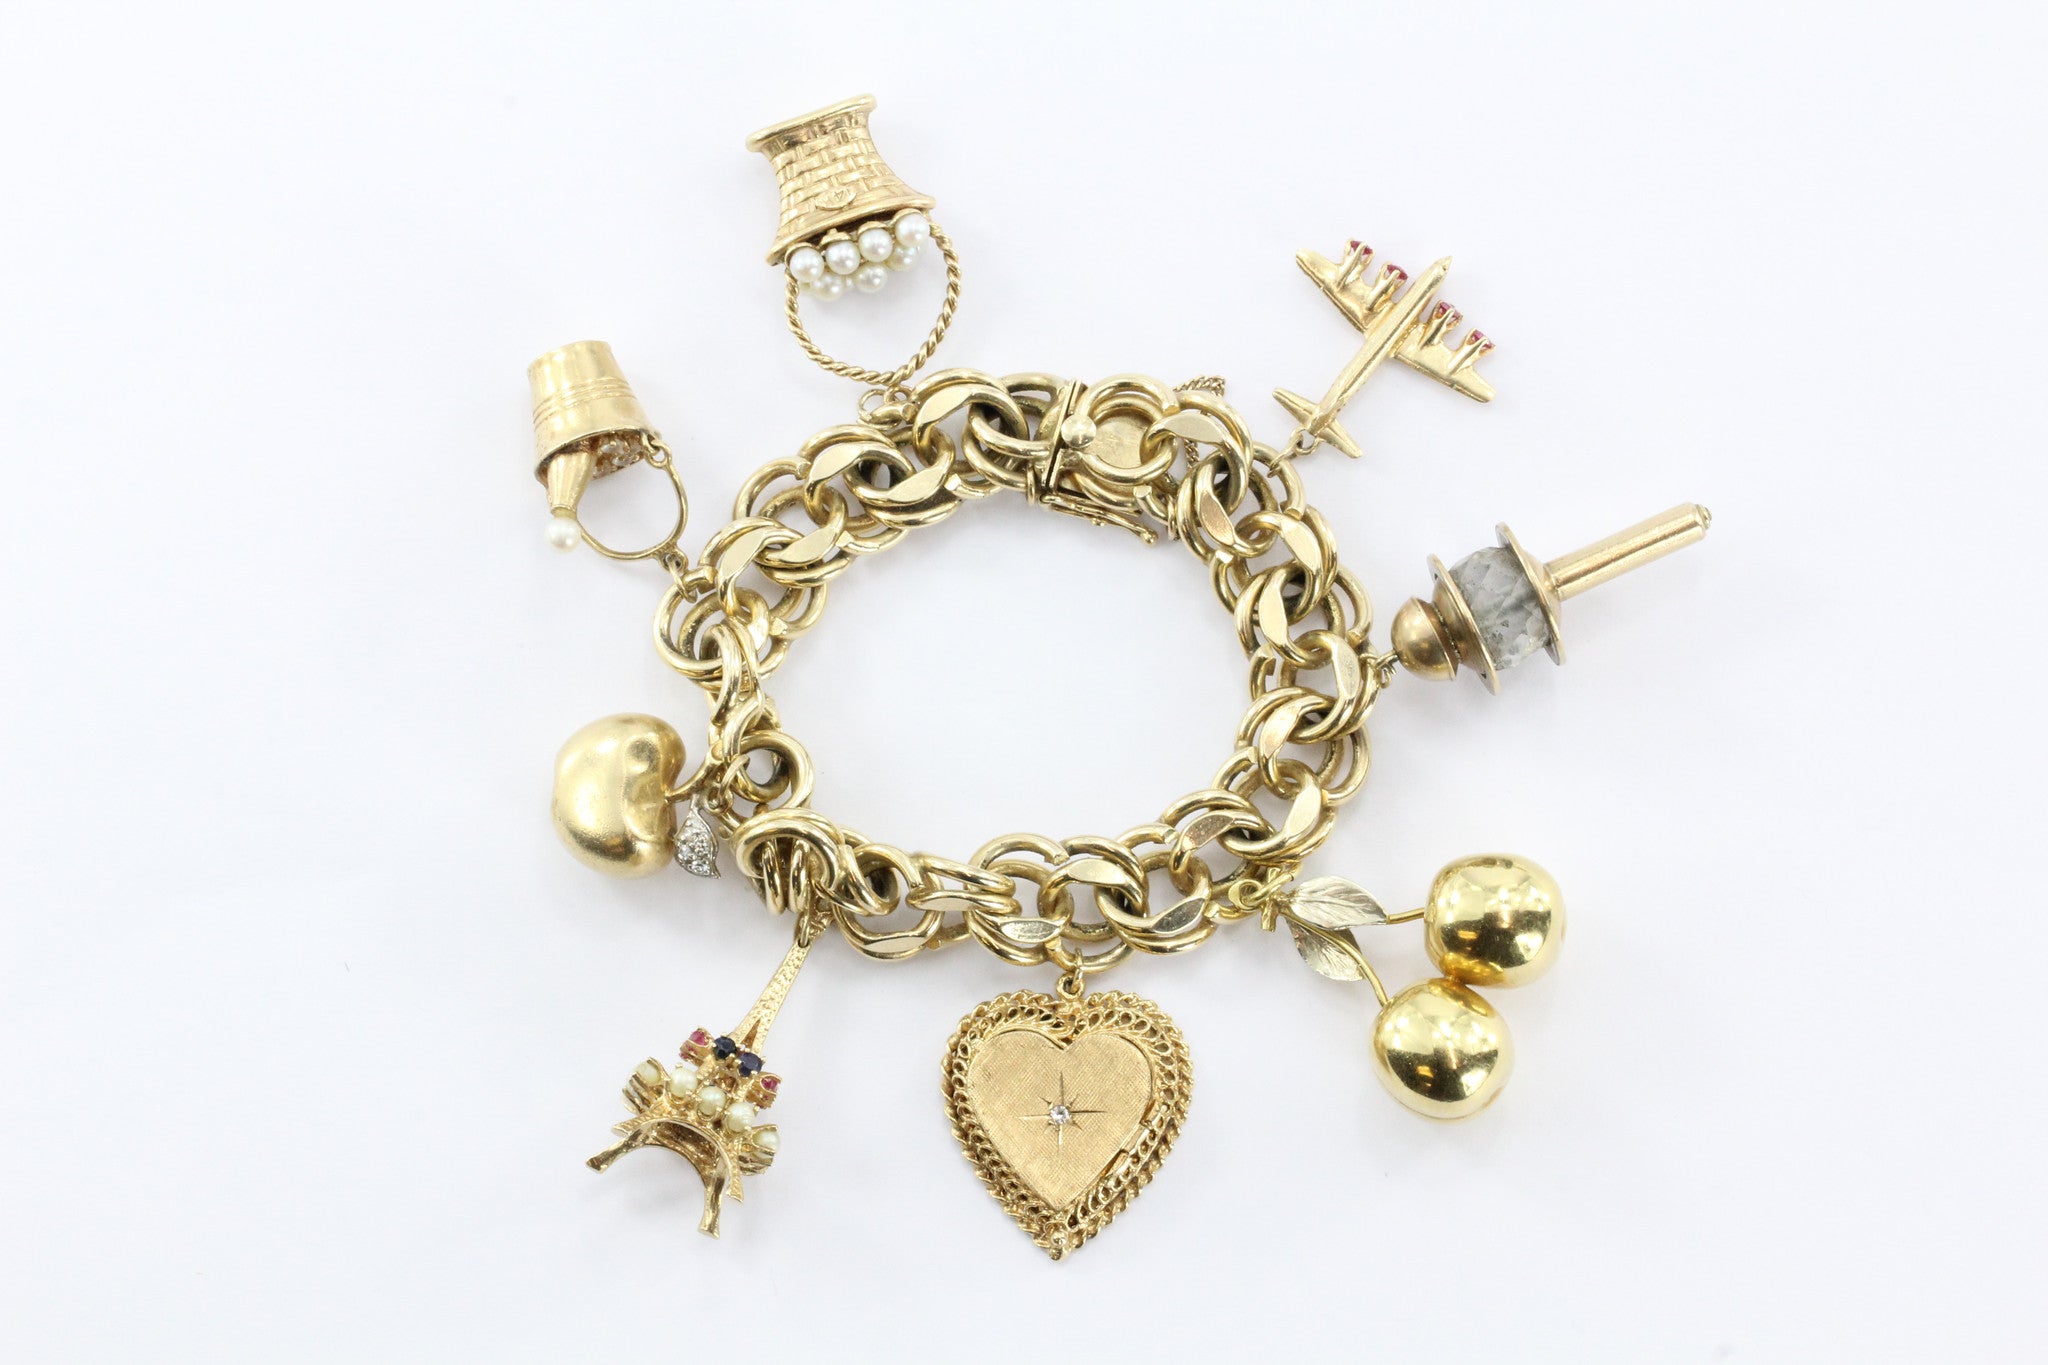 Scented Signature Charm Bracelet (Pick Your Own Charm)